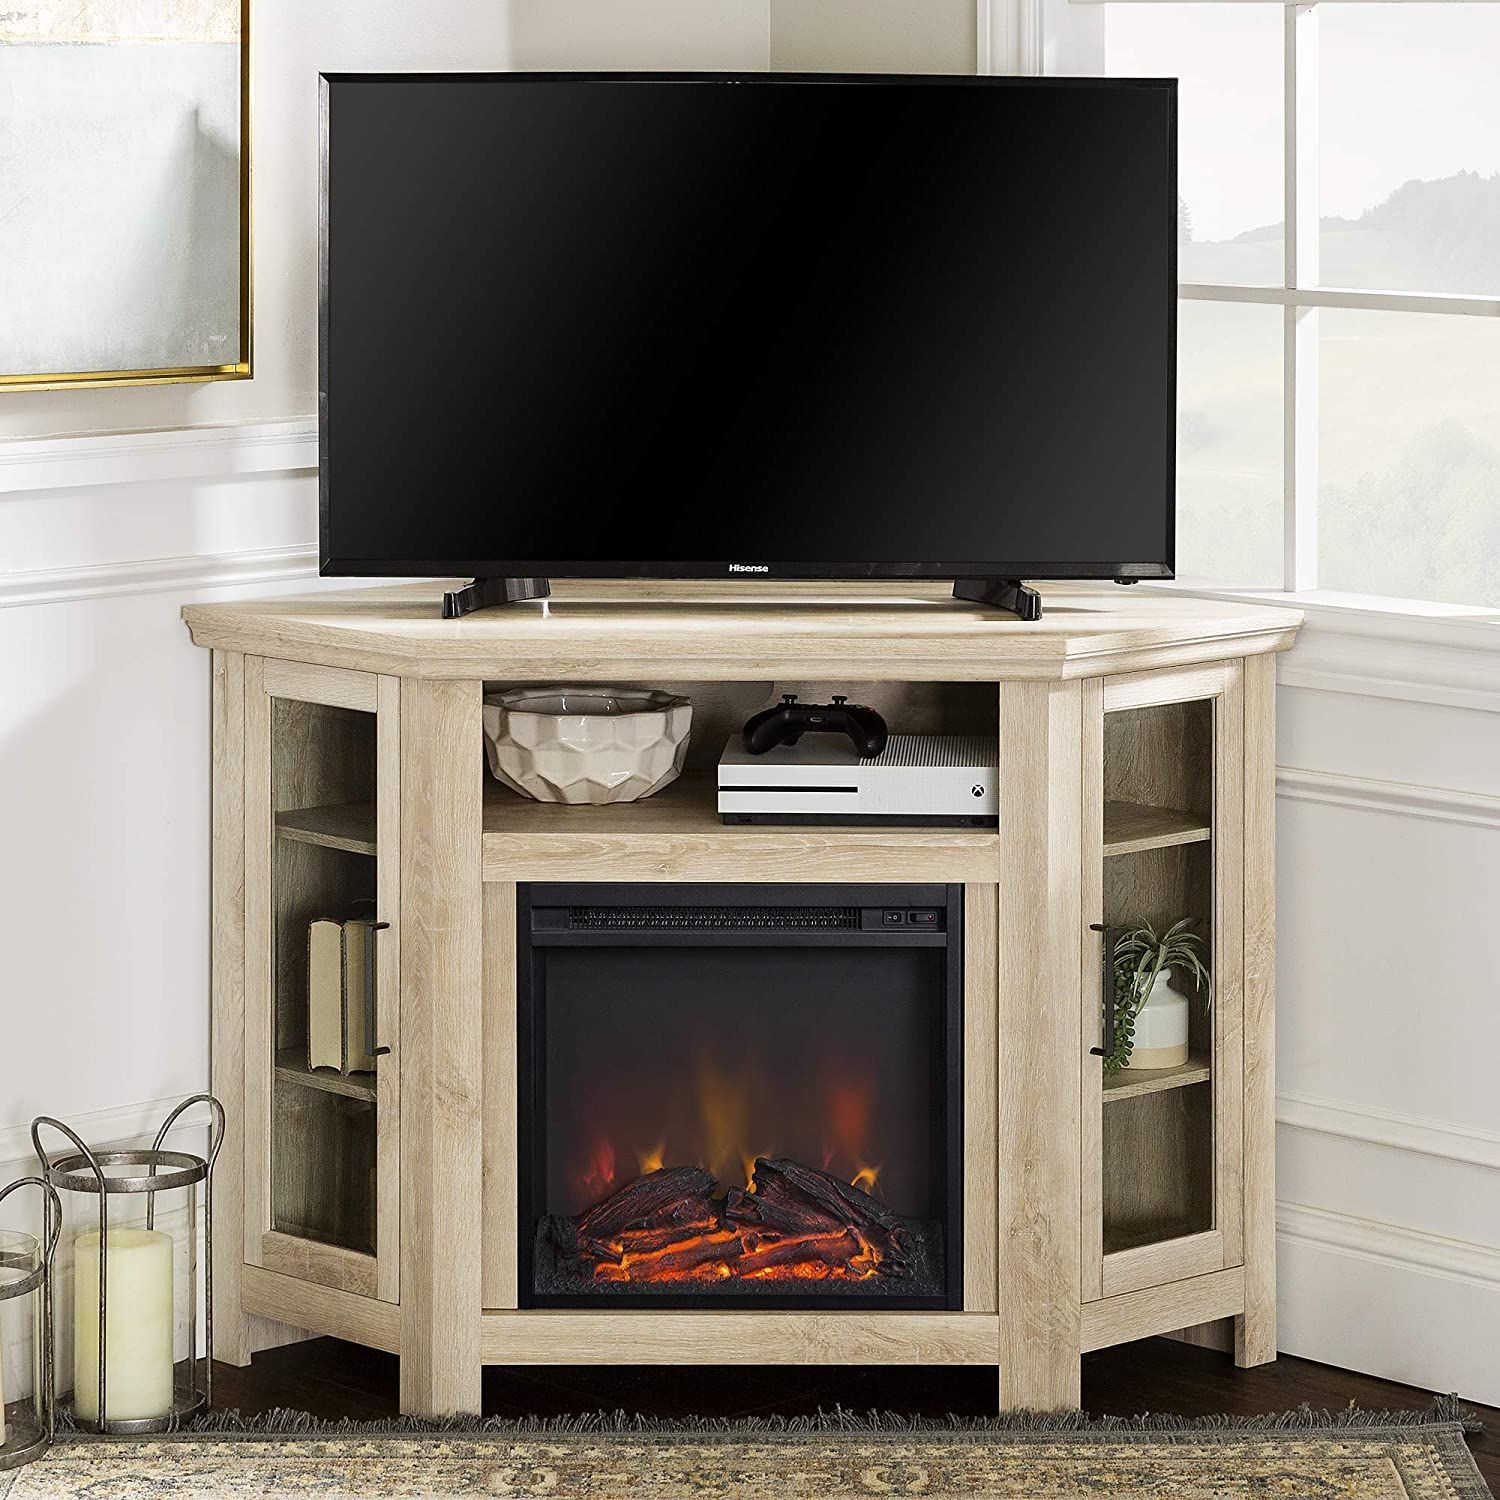 The 9 Best Fireplace Tv Stands 2021, Corner Tv Stand With Built In Fireplace